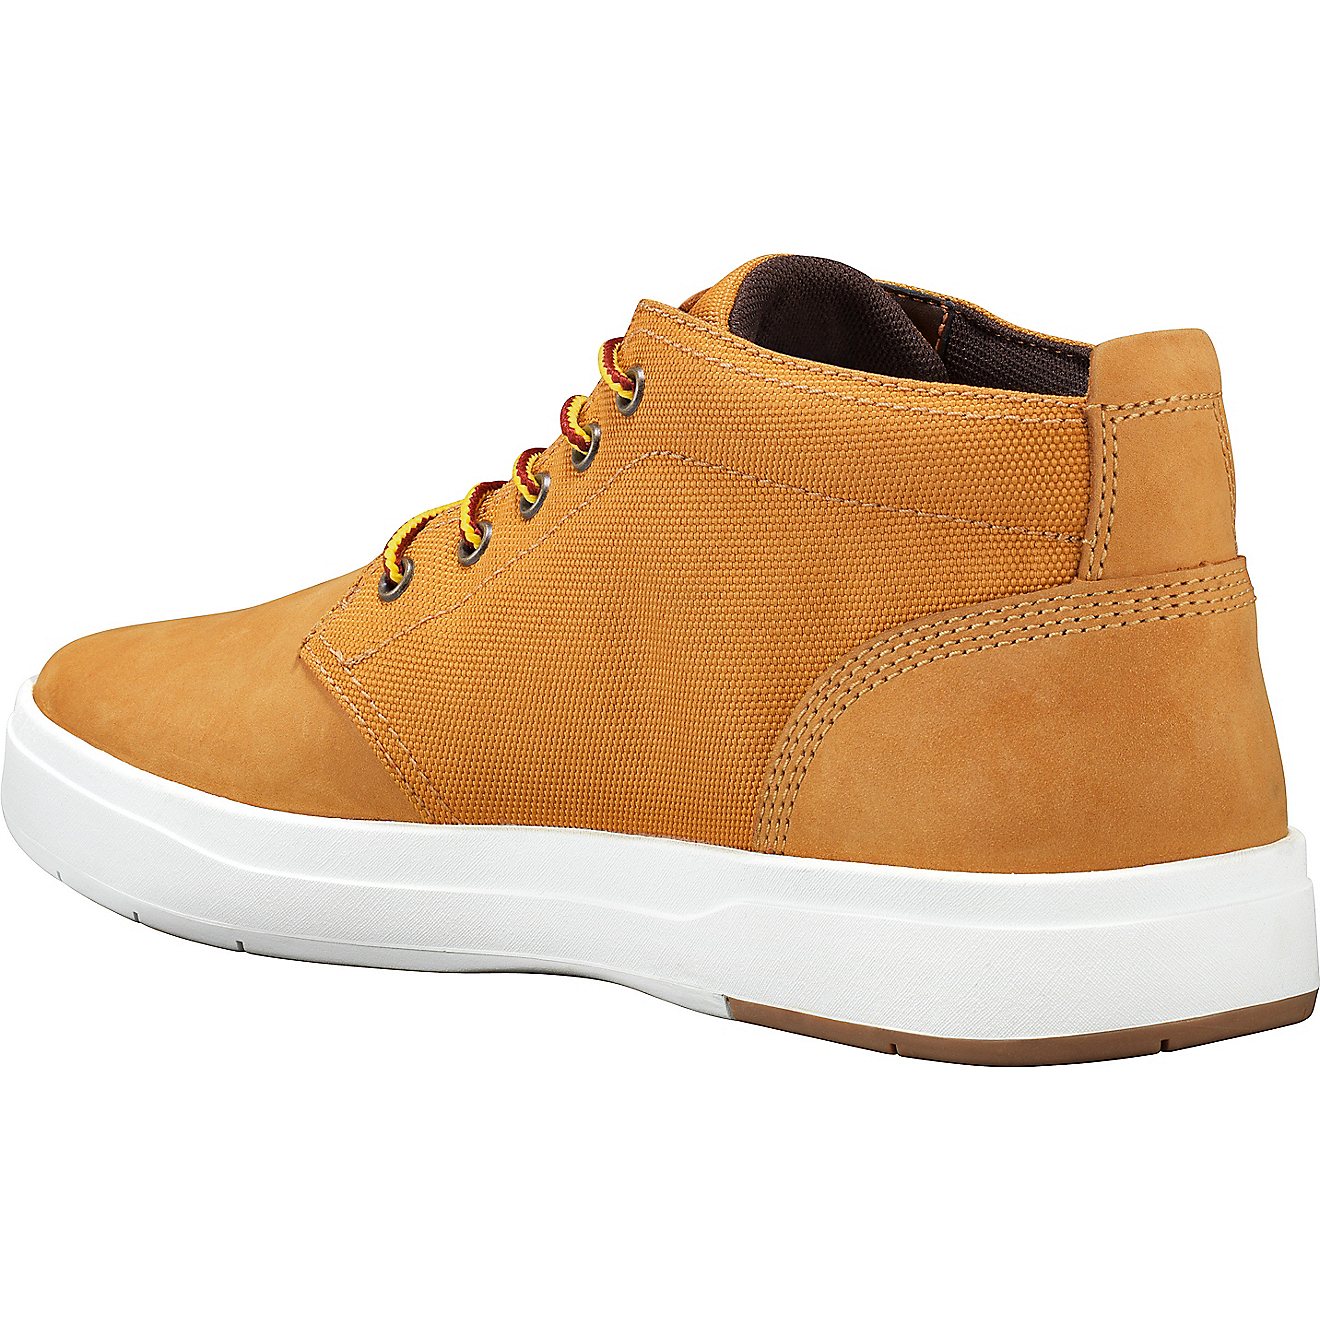 Timberland Men's Davis Square Fabric and Leather Chukka Boots                                                                    - view number 3